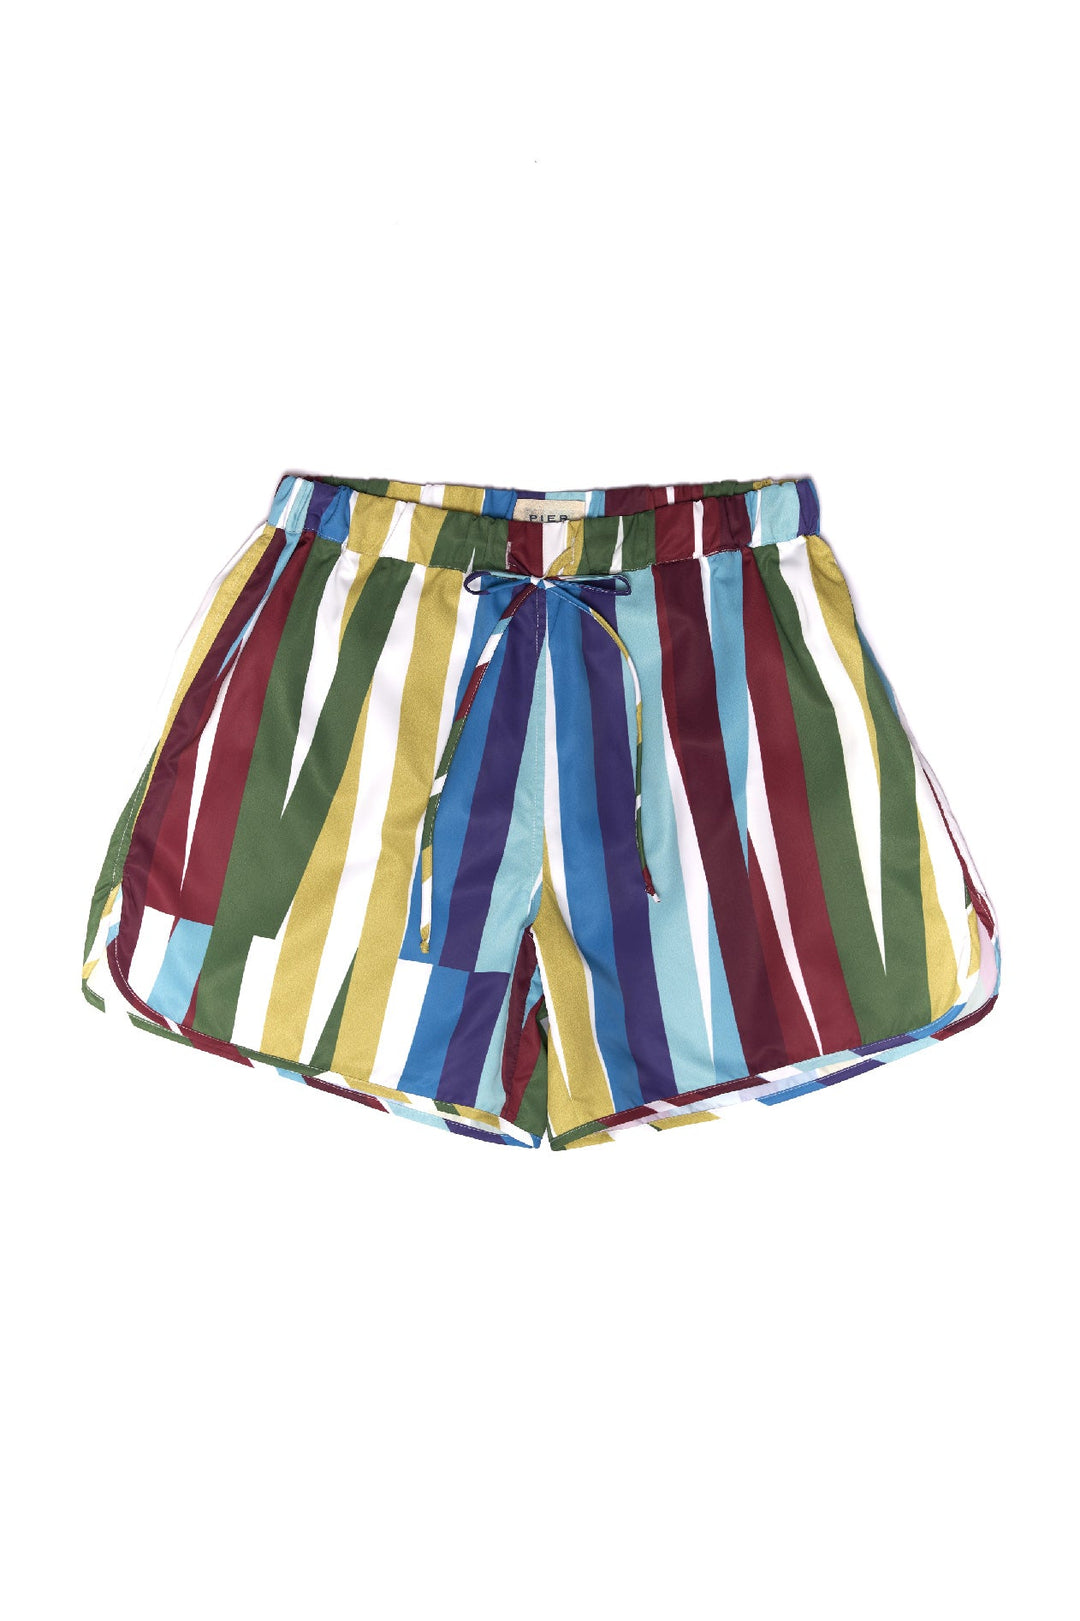 Colorful striped shorts with a drawstring